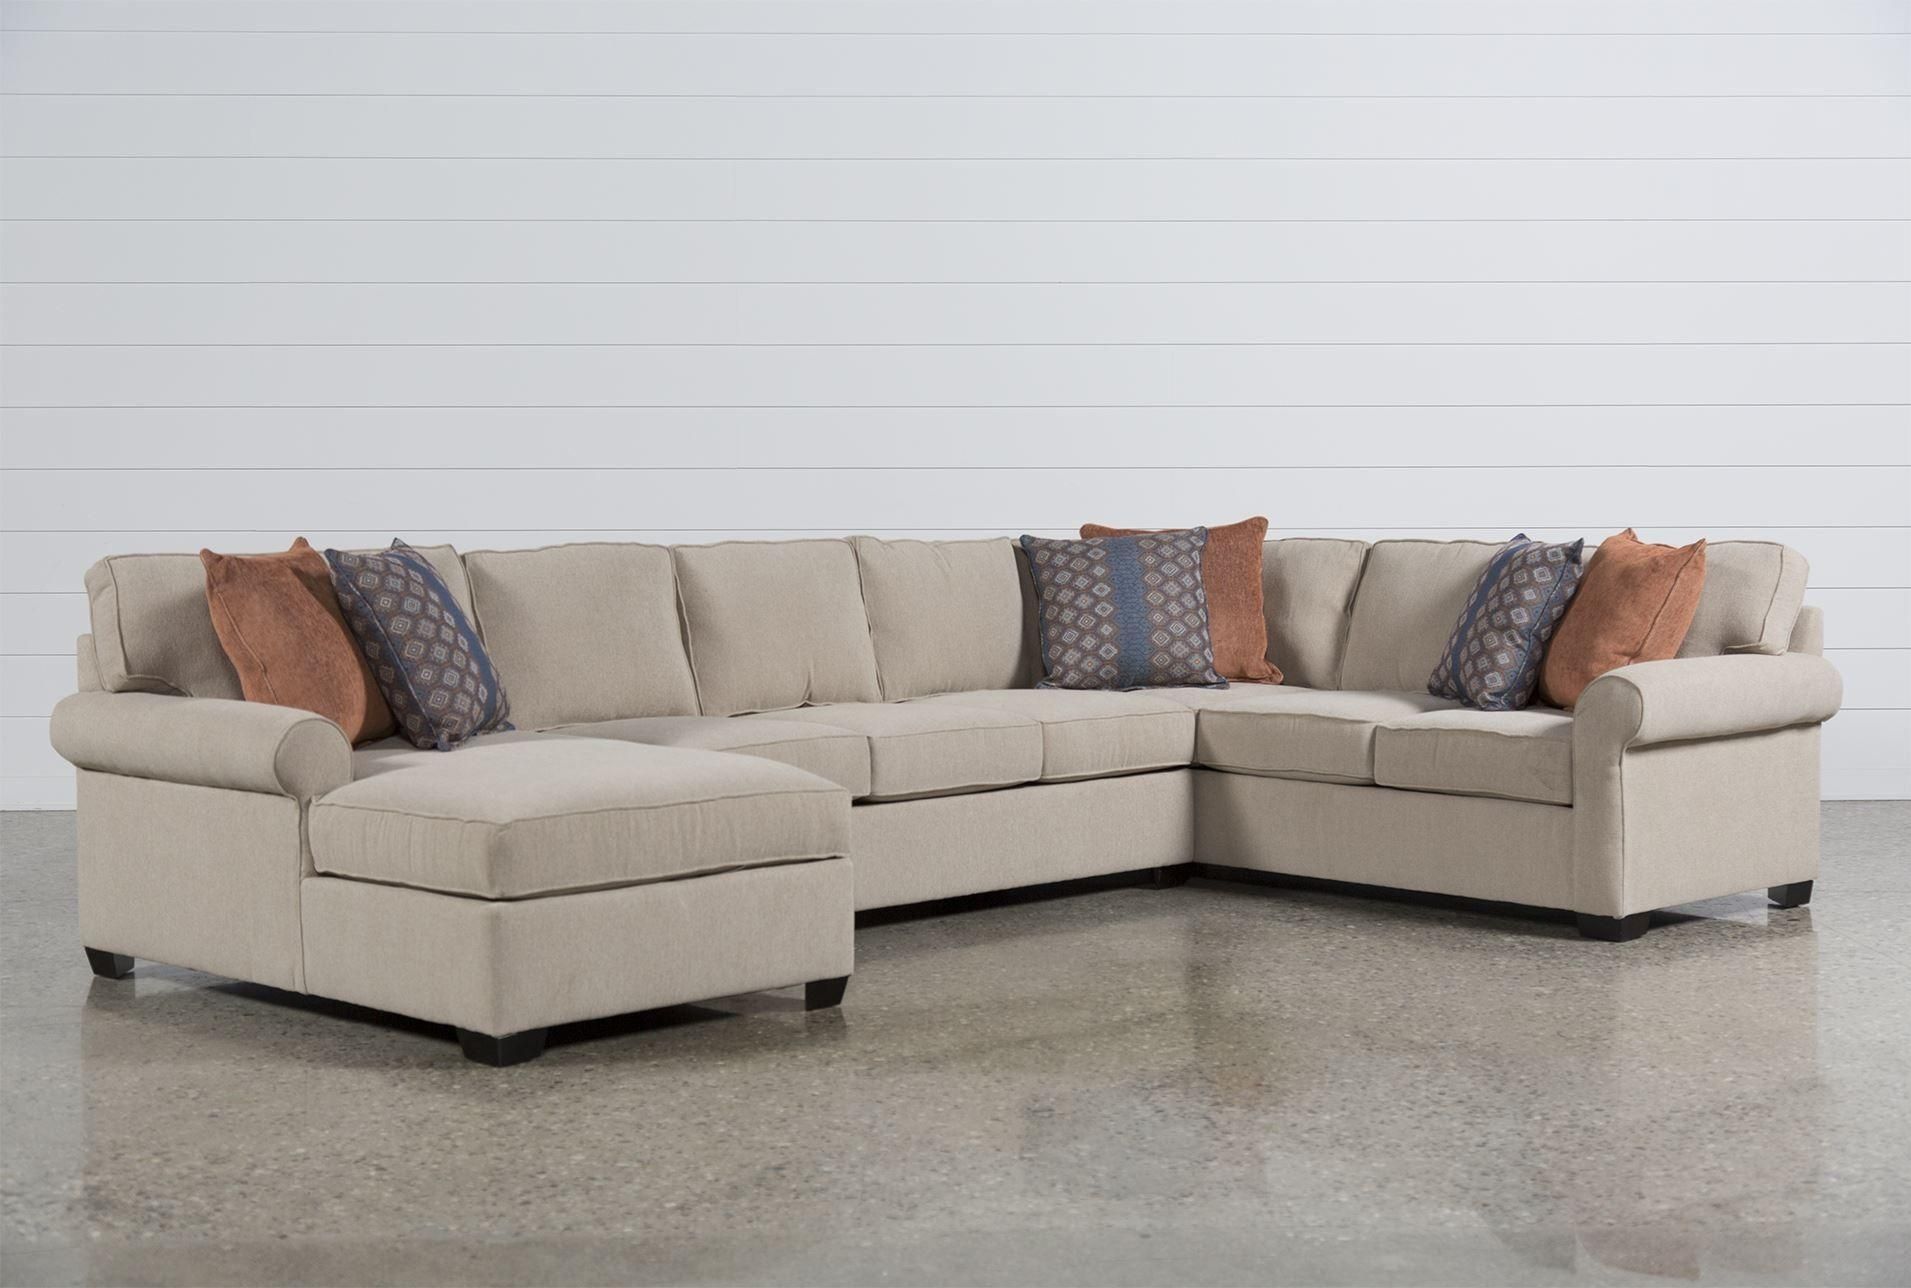 Furniture : Target Loveseat Unique Glamour Ii 3 Piece Sectional With Regard To Target Sectional Sofas (View 6 of 10)